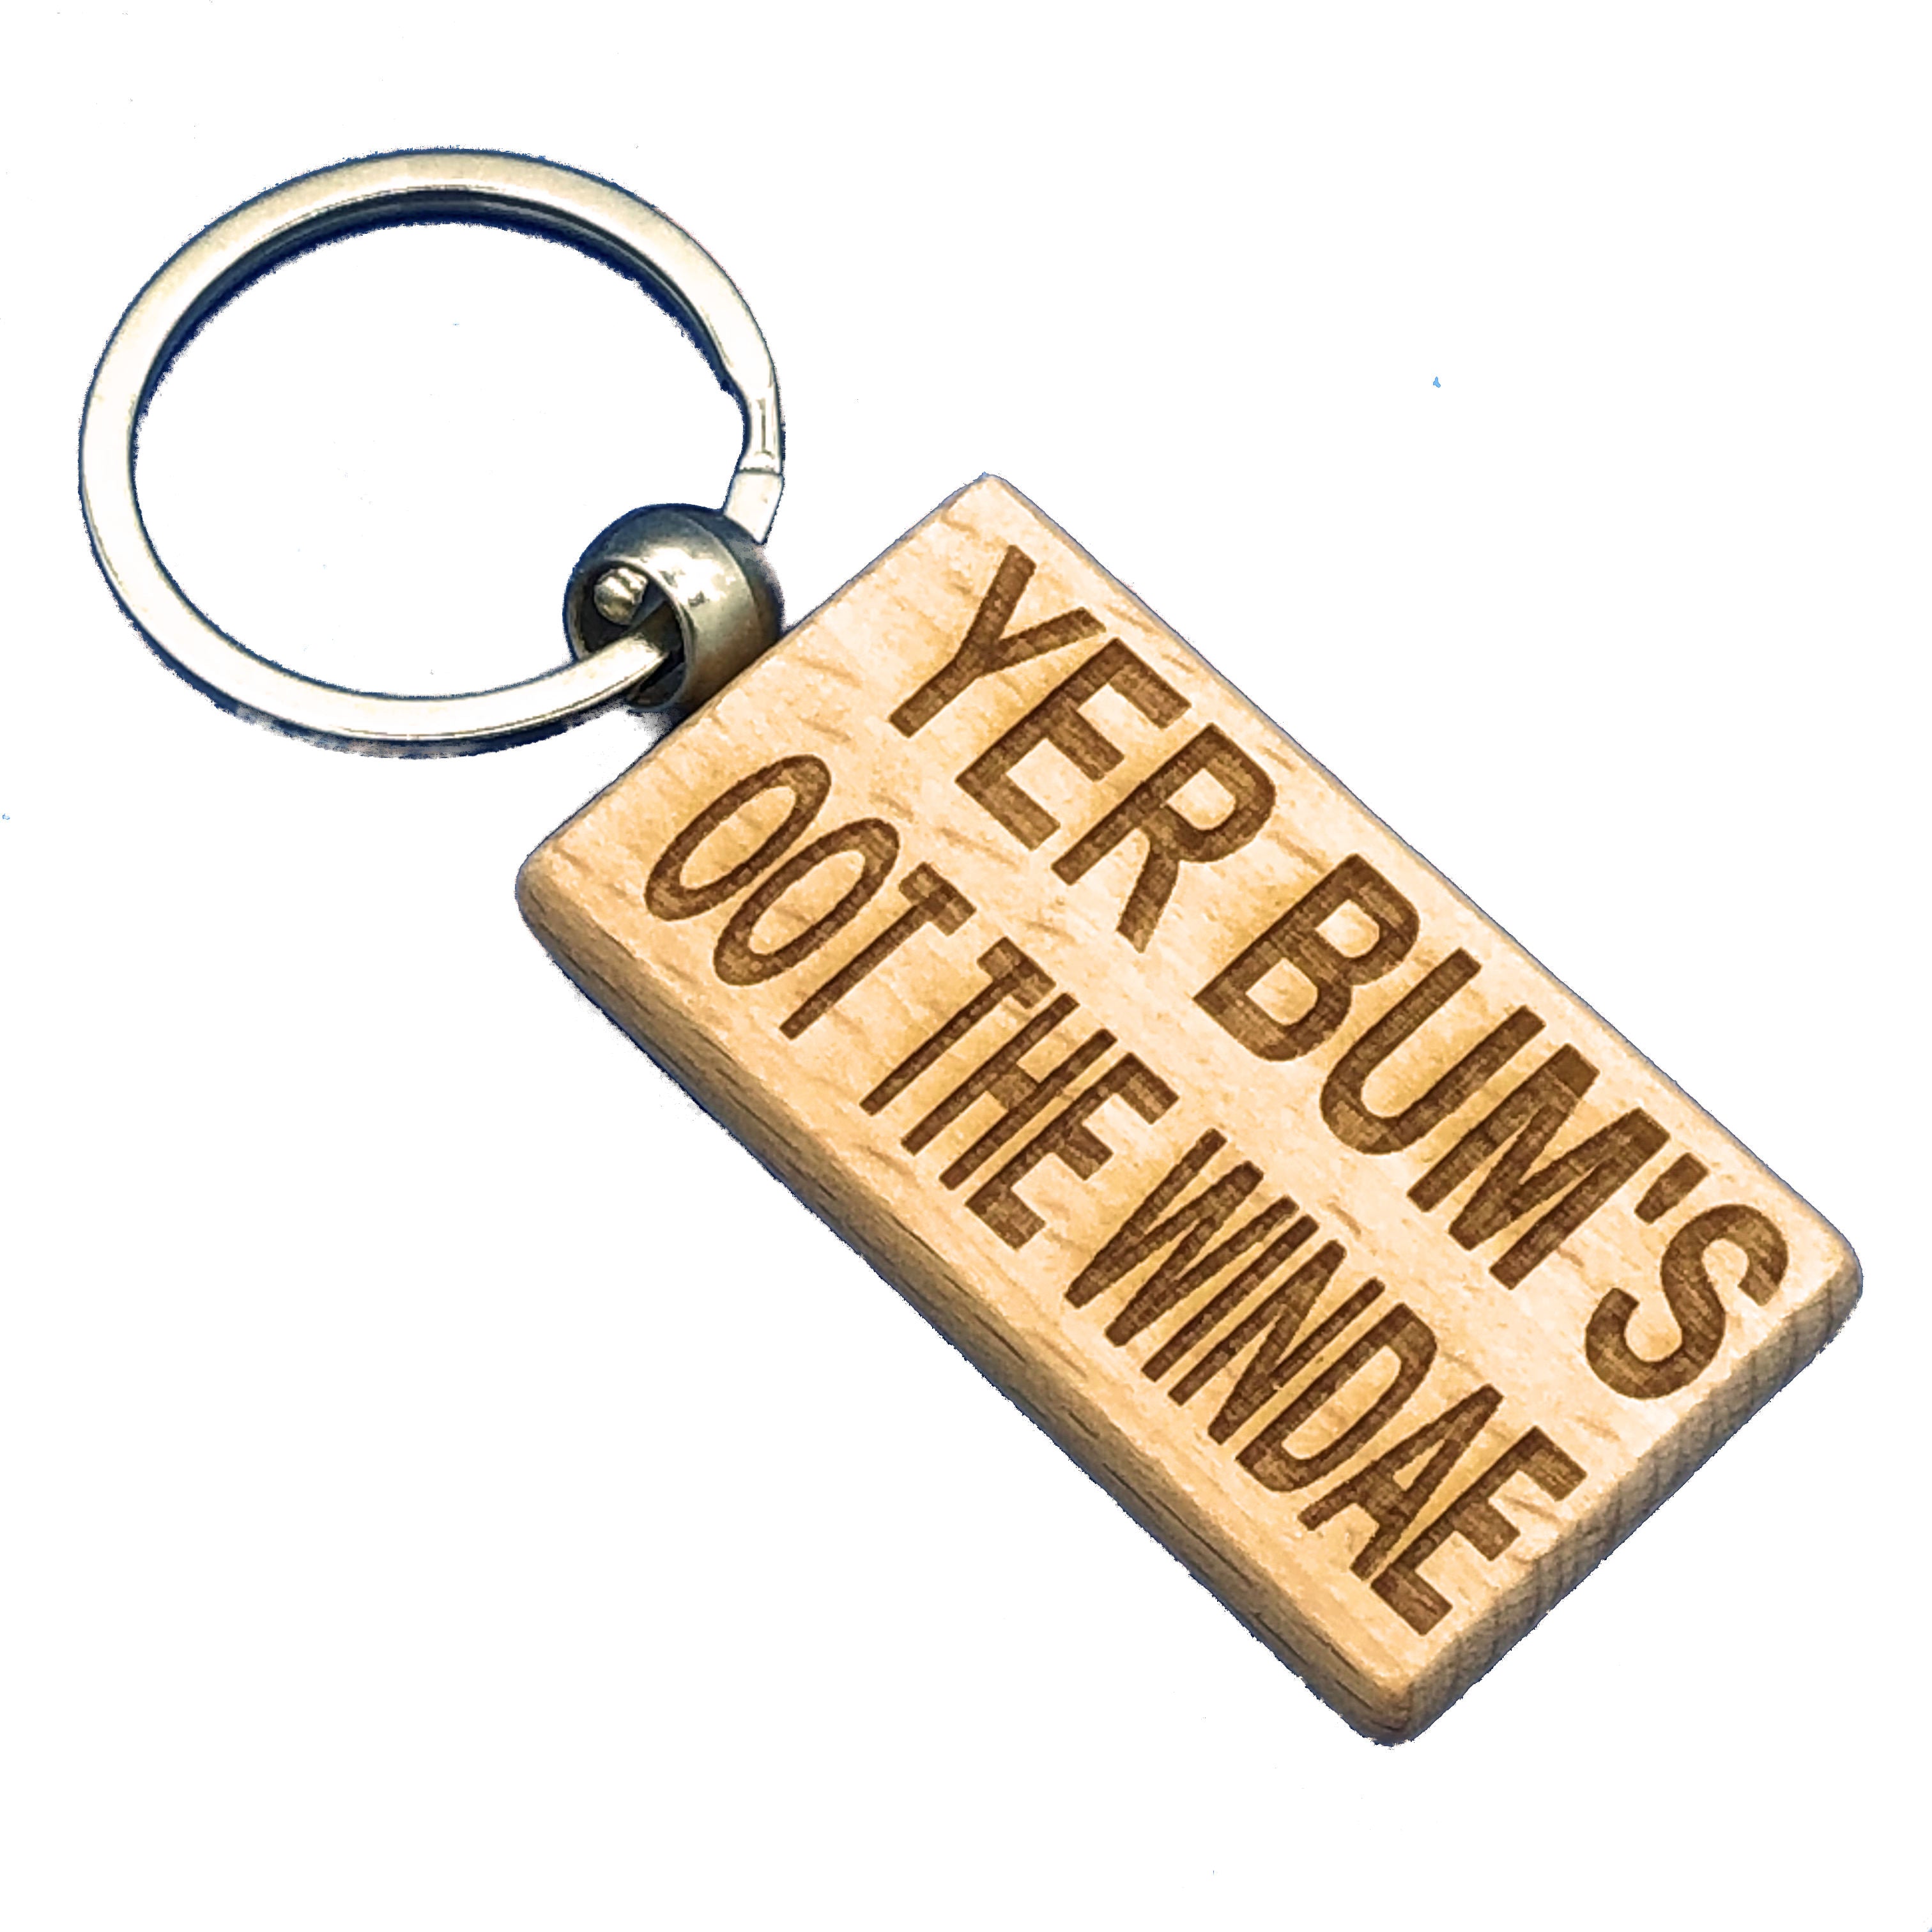 Wooden keyring laser engraved with Scottish dialect - yer bum's oot the windae